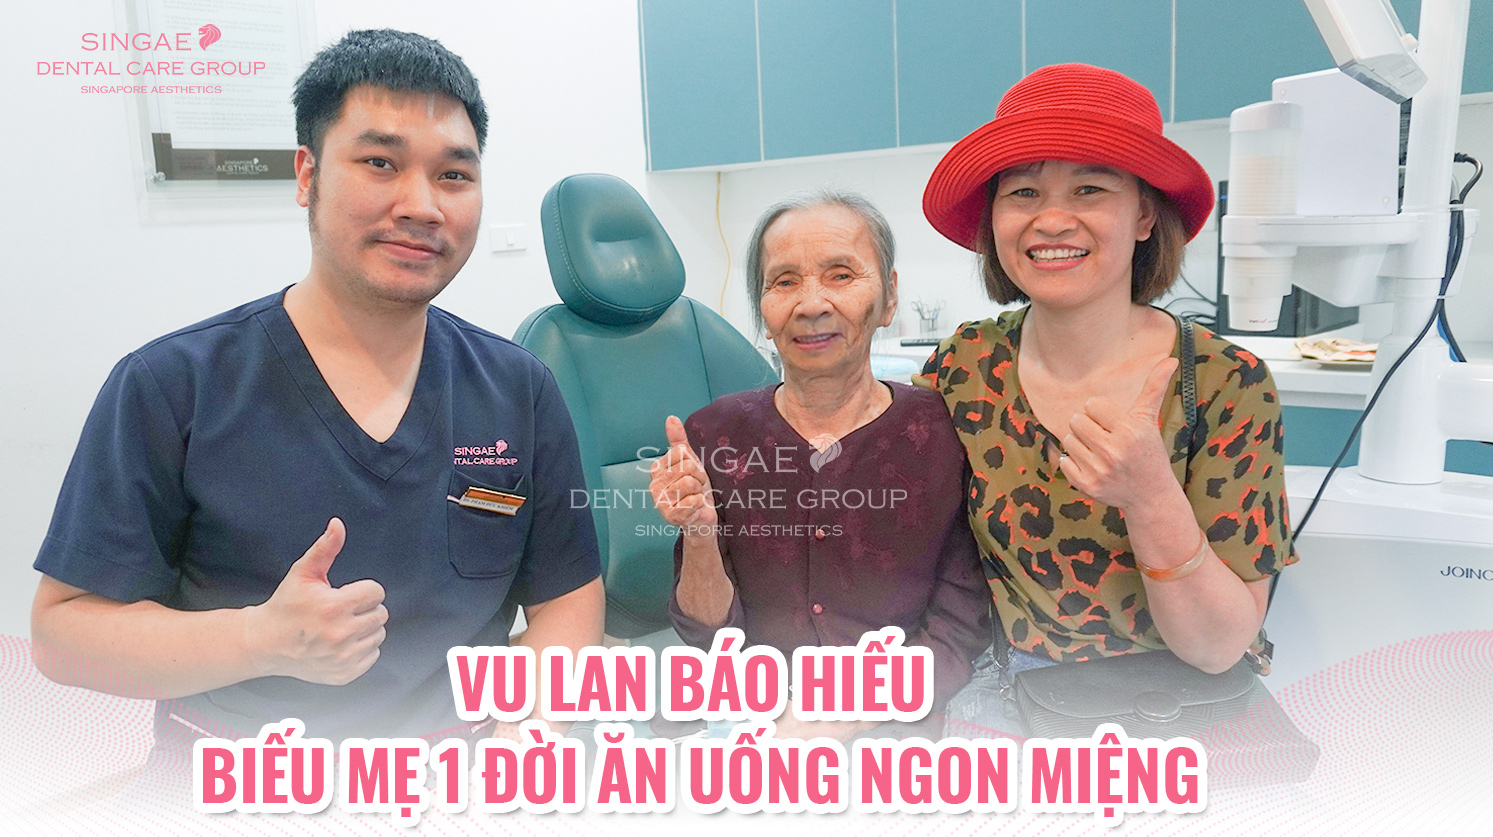 VU LAN PAYS FILIAL PIETY – BLESS HER MOTHER FOR A LIFETIME OF DELICIOUS FOOD